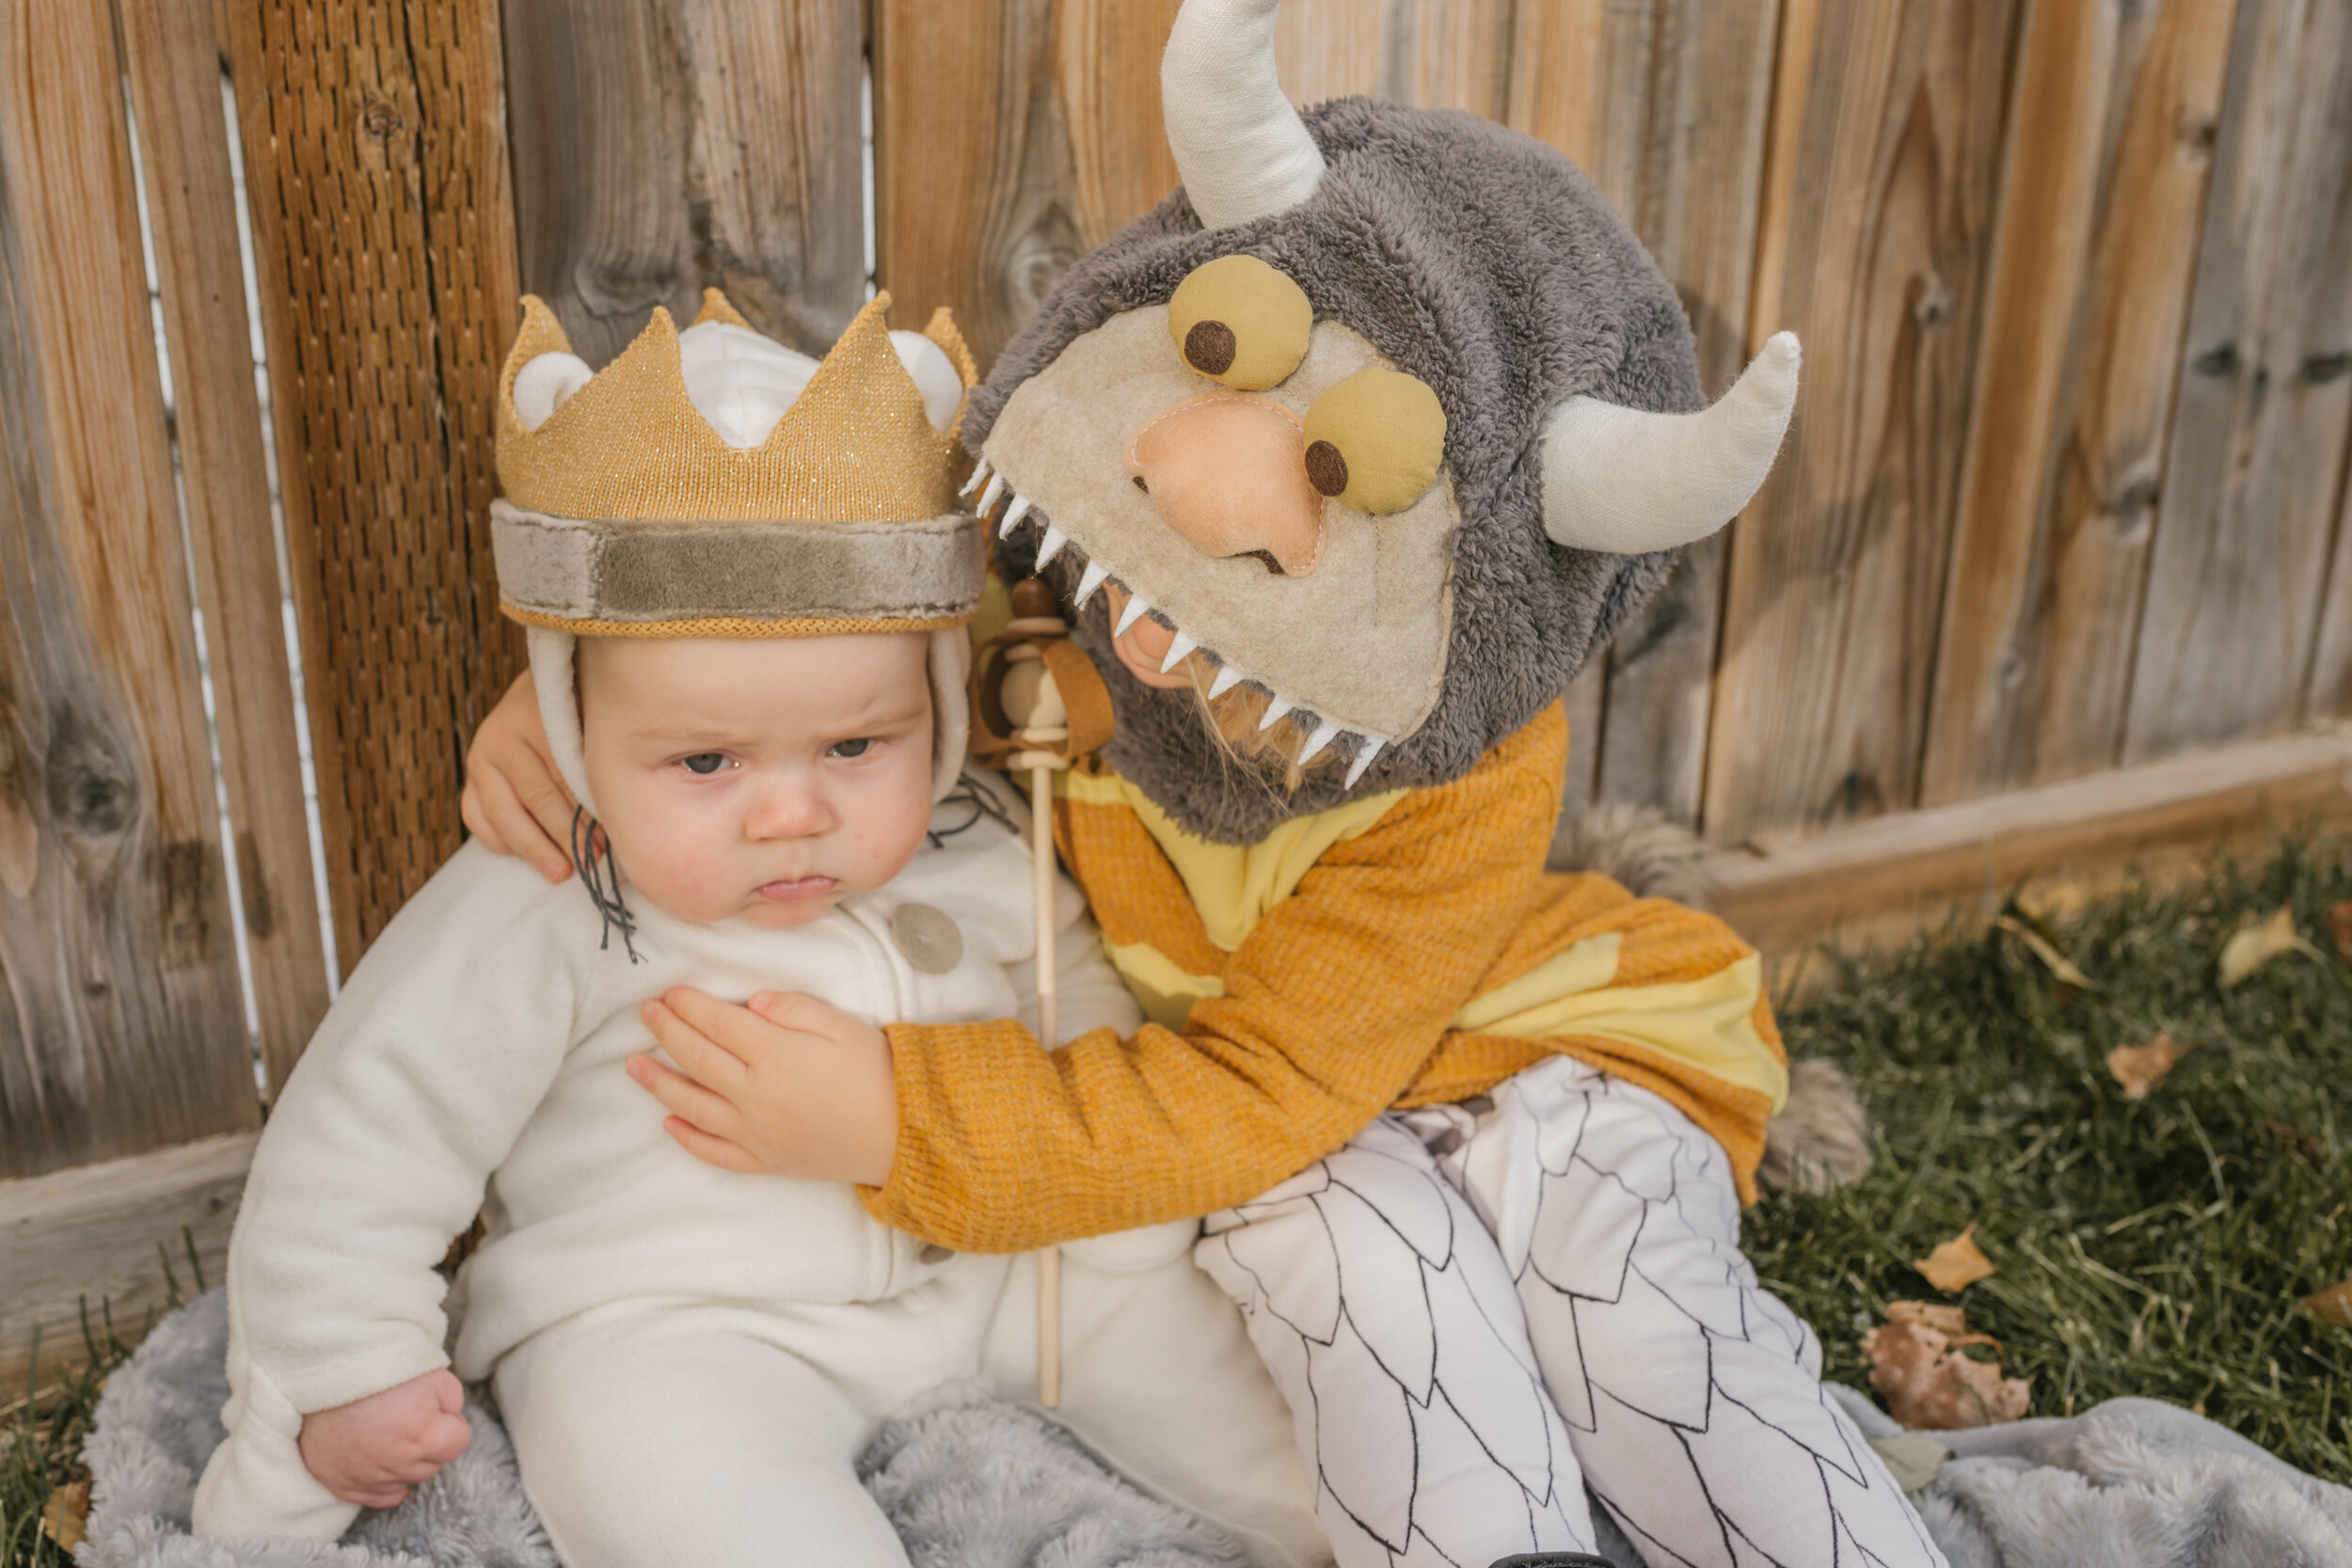 Where The Wild Things Are Costume Diy